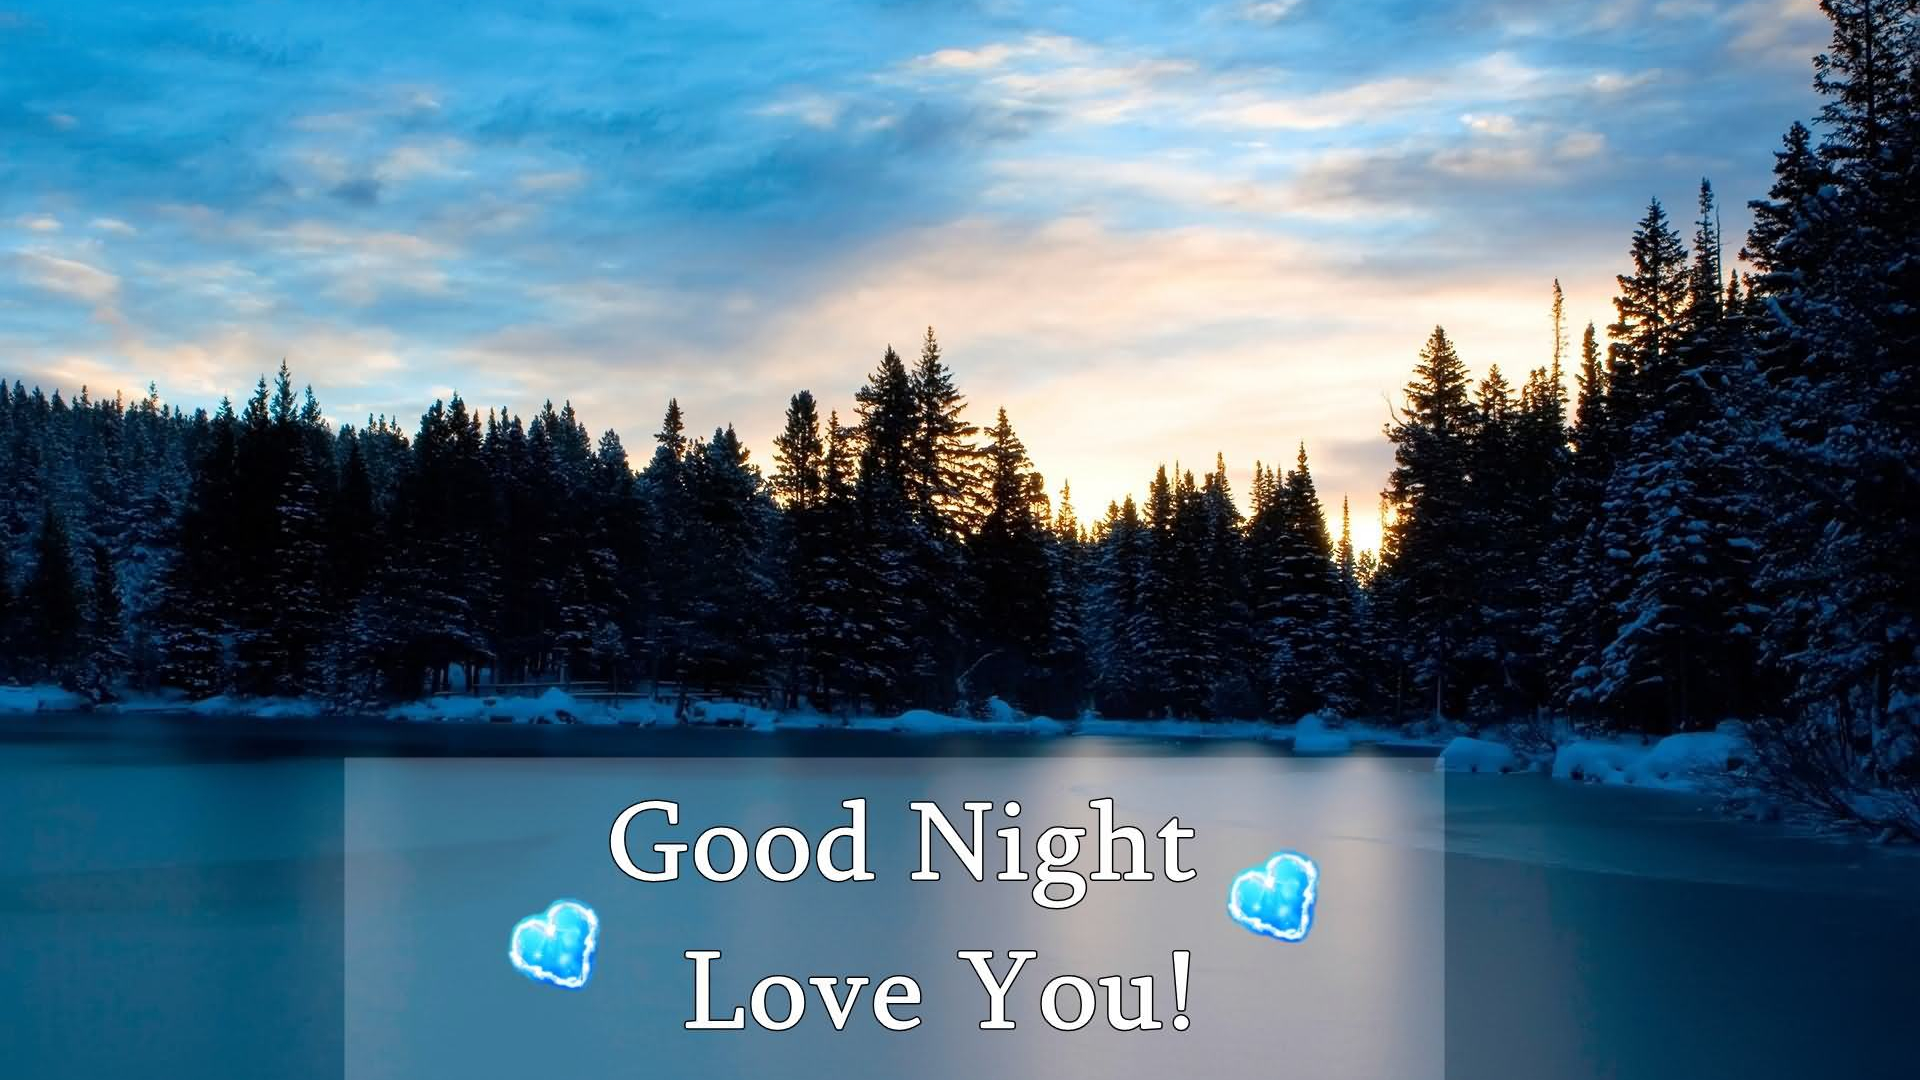 Free download 15 Awesome Good Night Love Image [1920x1200] for your Desktop, Mobile & Tablet. Explore Good Night I Love You Wallpaper. Good Night I Love You Wallpaper, I